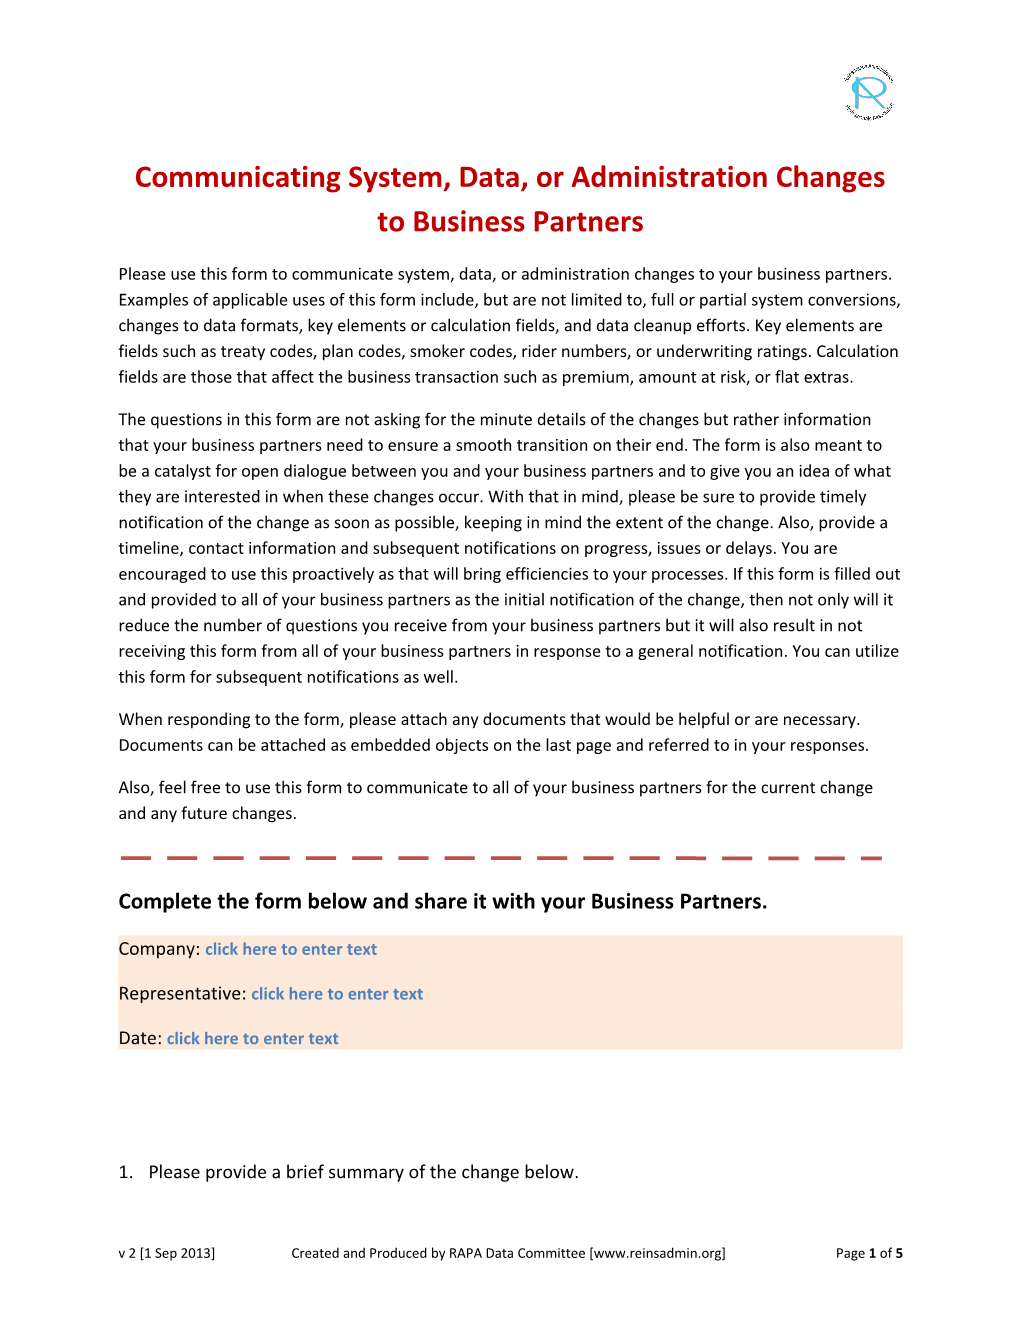 Communicating System, Data, Or Administration Changes to Business Partners